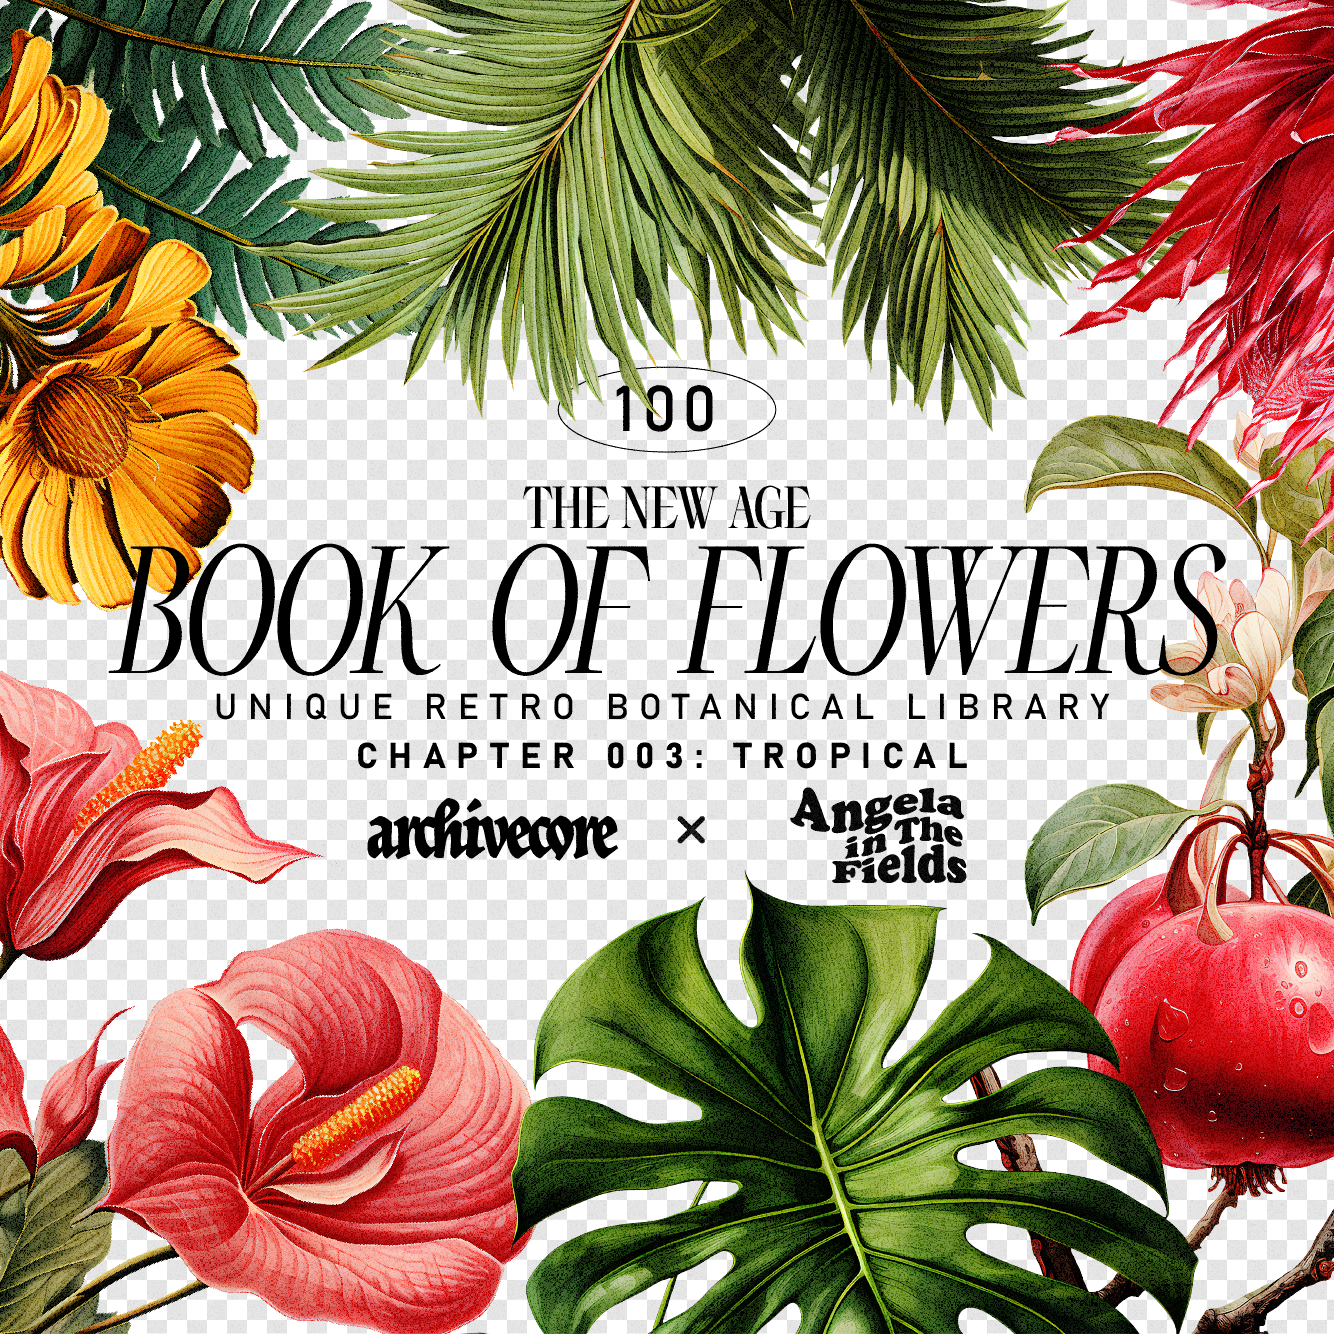 BOOK OF FLOWERS 3 Tropical